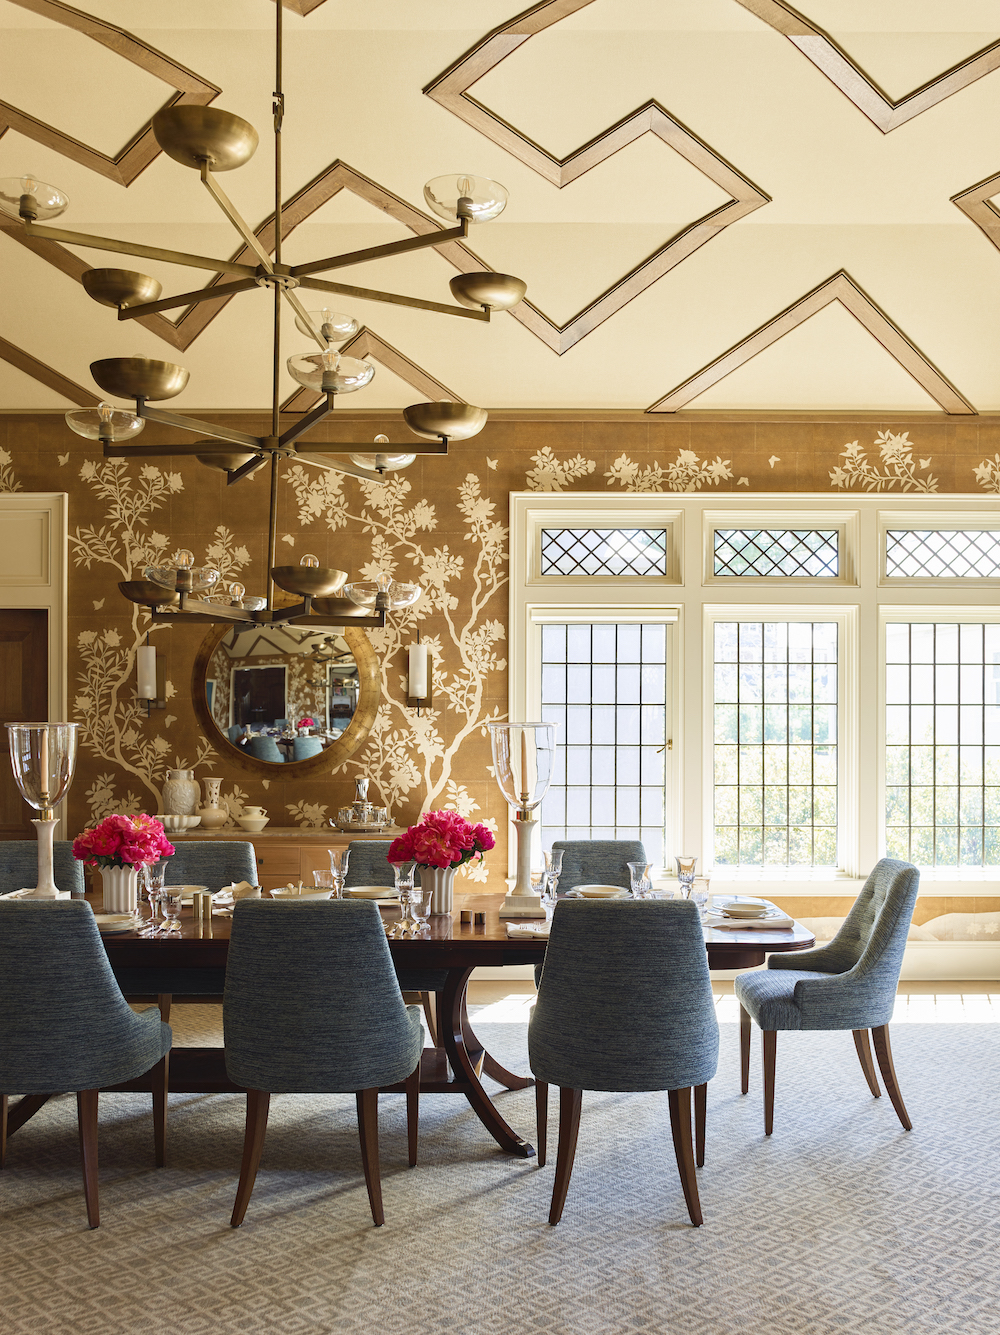 A dining room with interior with design by Gideon Mendelson in Effect Magazine